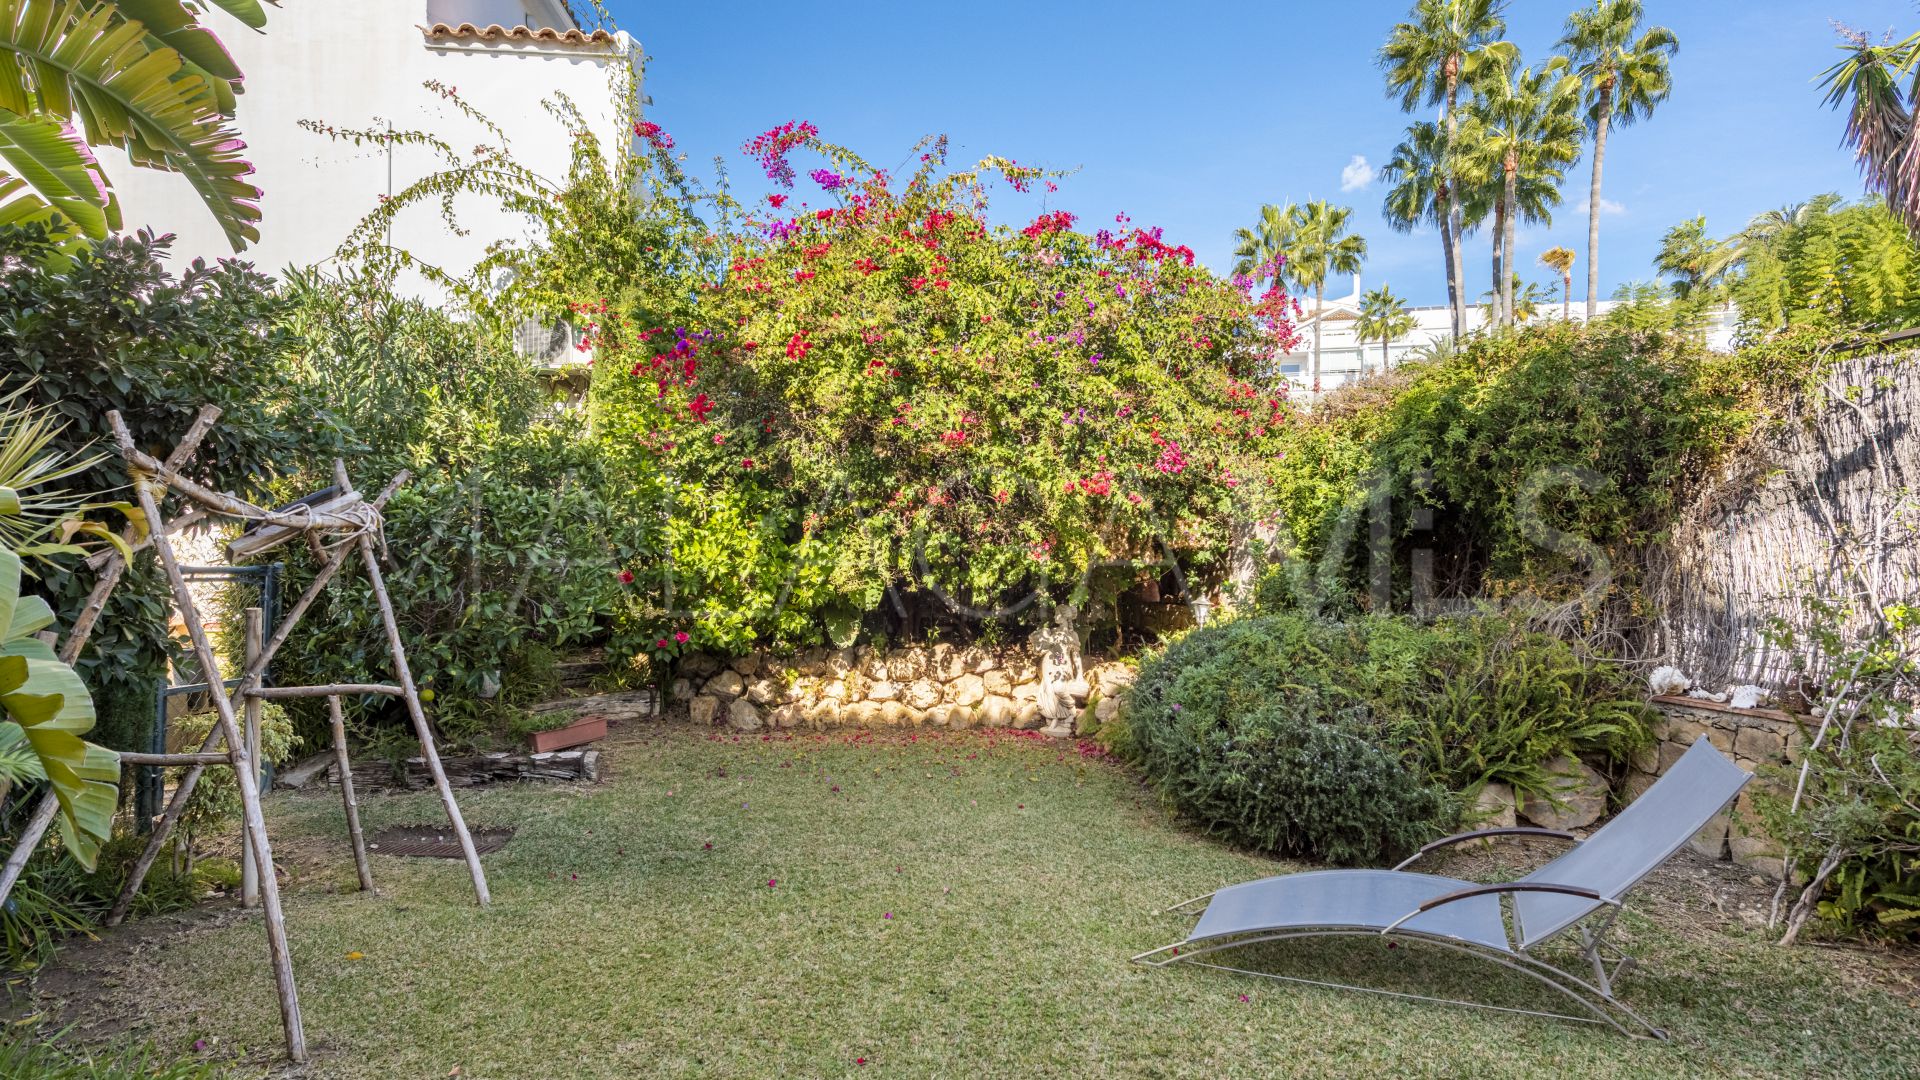 Pareado for sale with 3 bedrooms in Atalaya